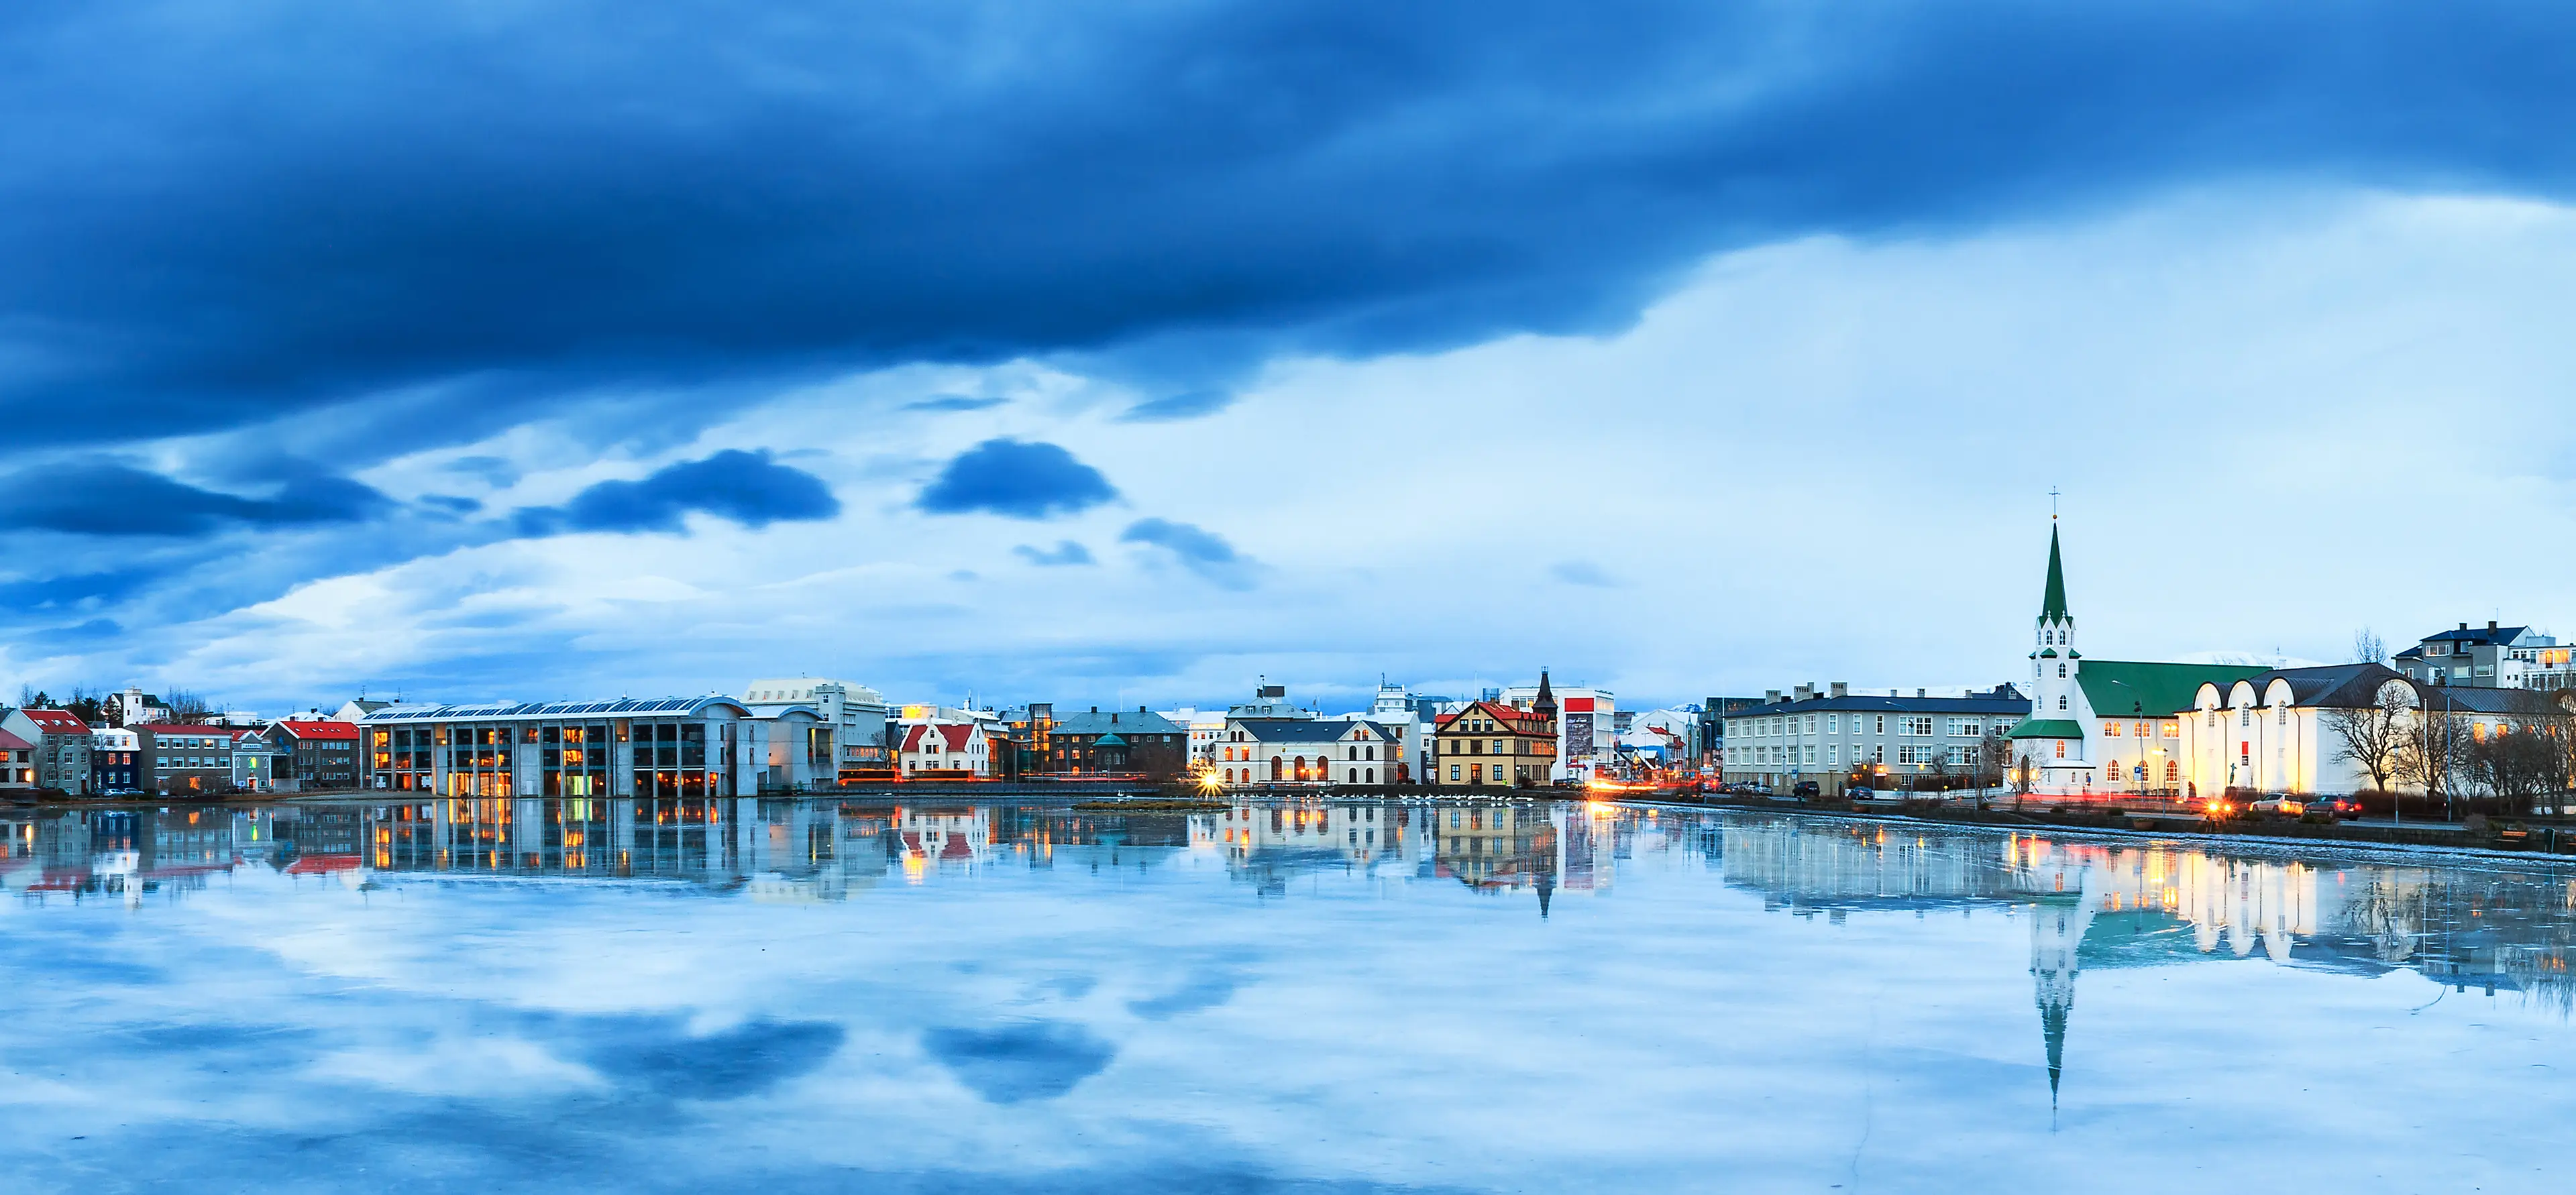 2-Day Sightseeing and Nightlife Extravaganza in Reykjavik with Friends